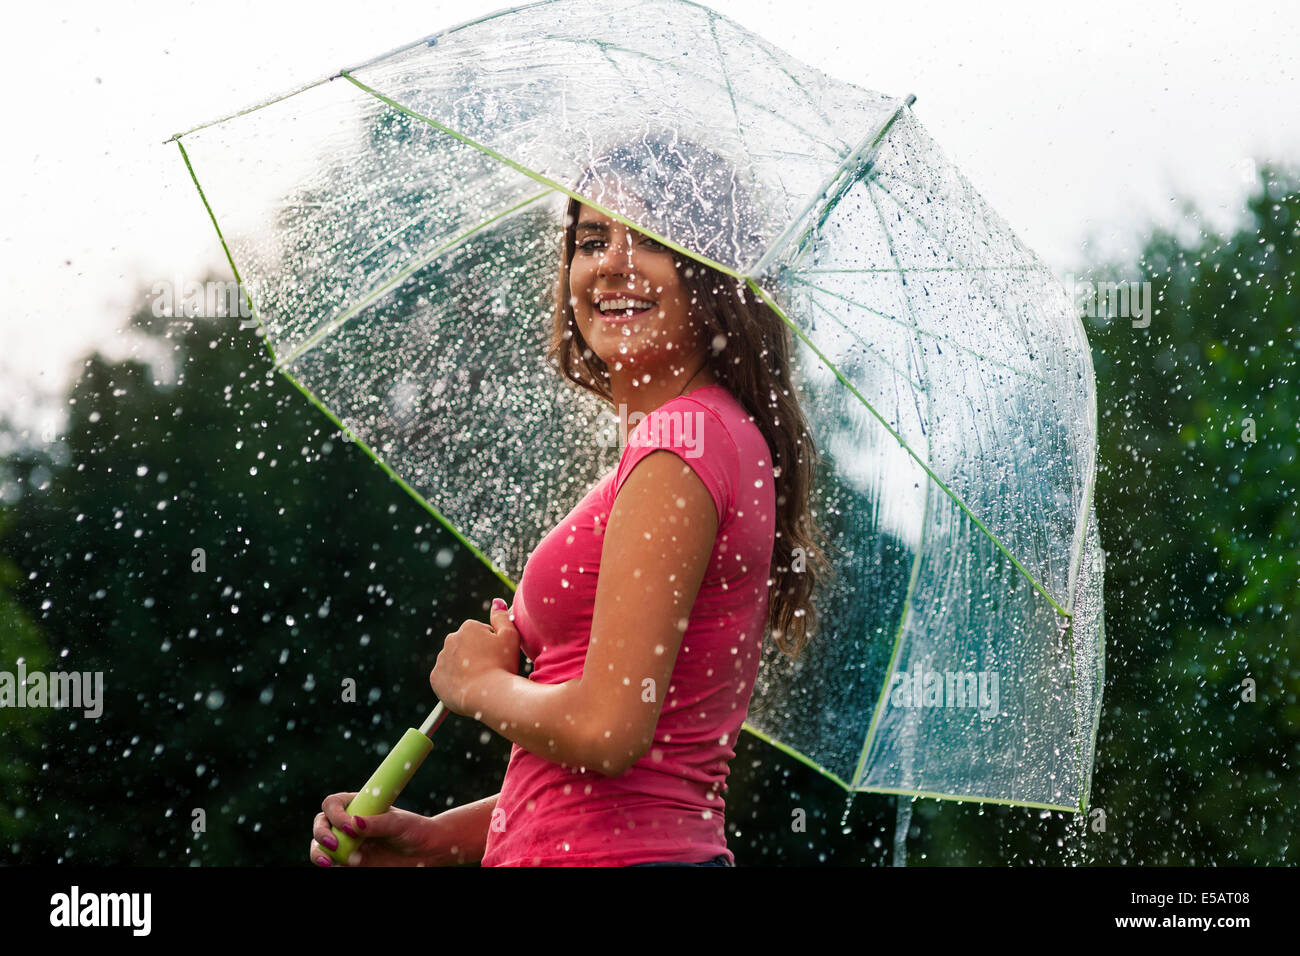 Young woman standing in summer rain with umbrella  Debica, Poland Stock Photo